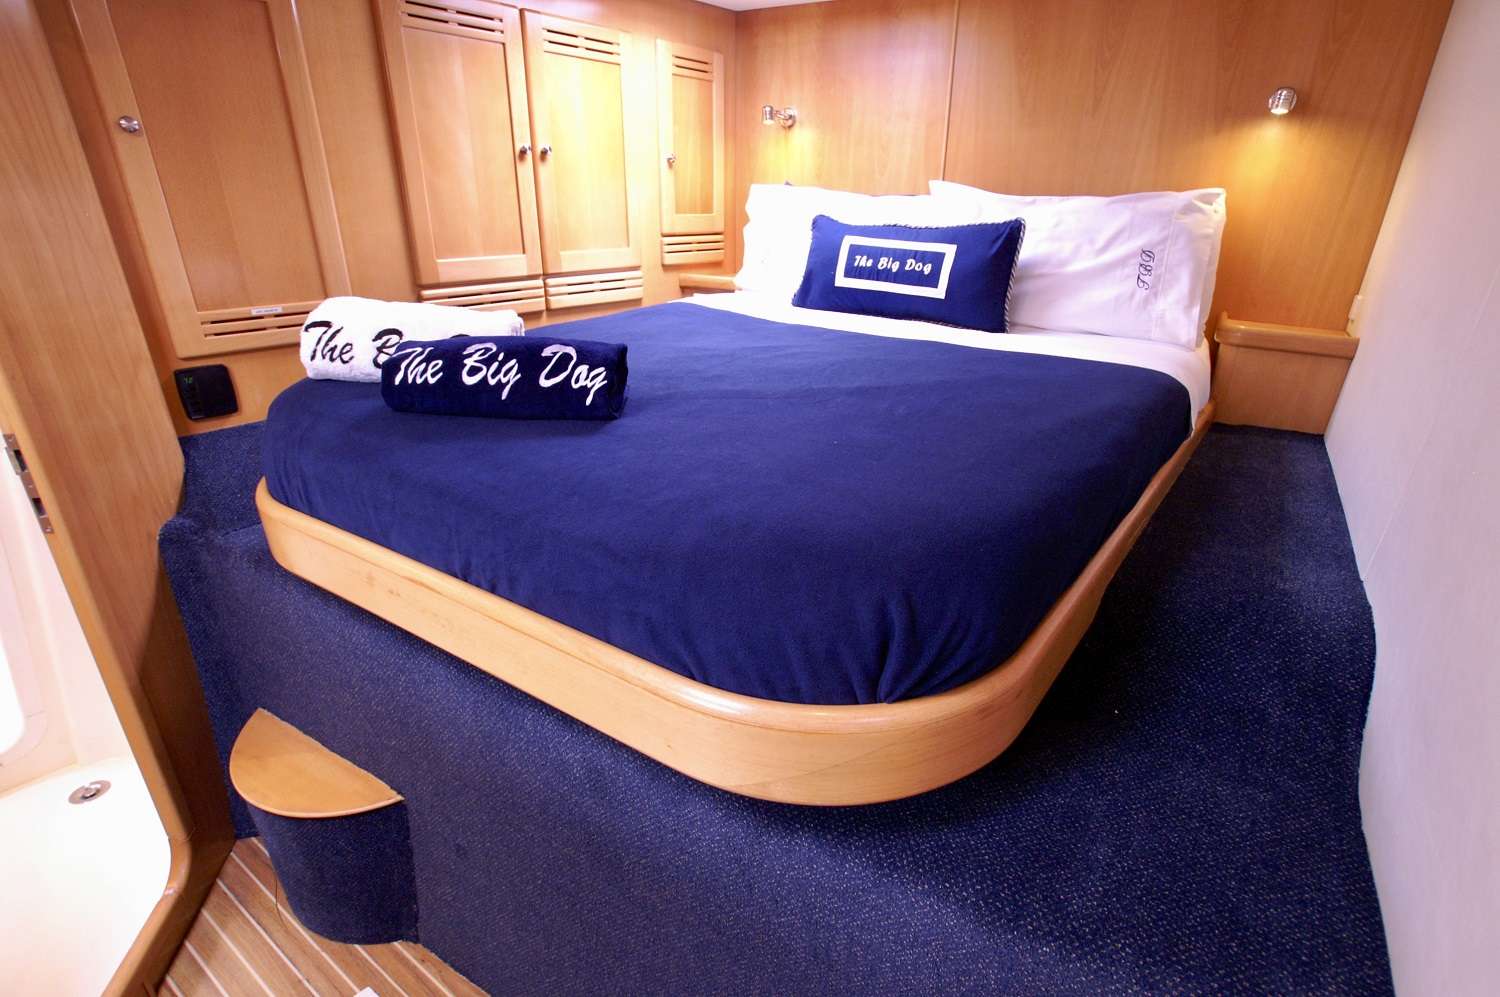 THE BIG DOG Yacht Charter - Queen guest cabin #1